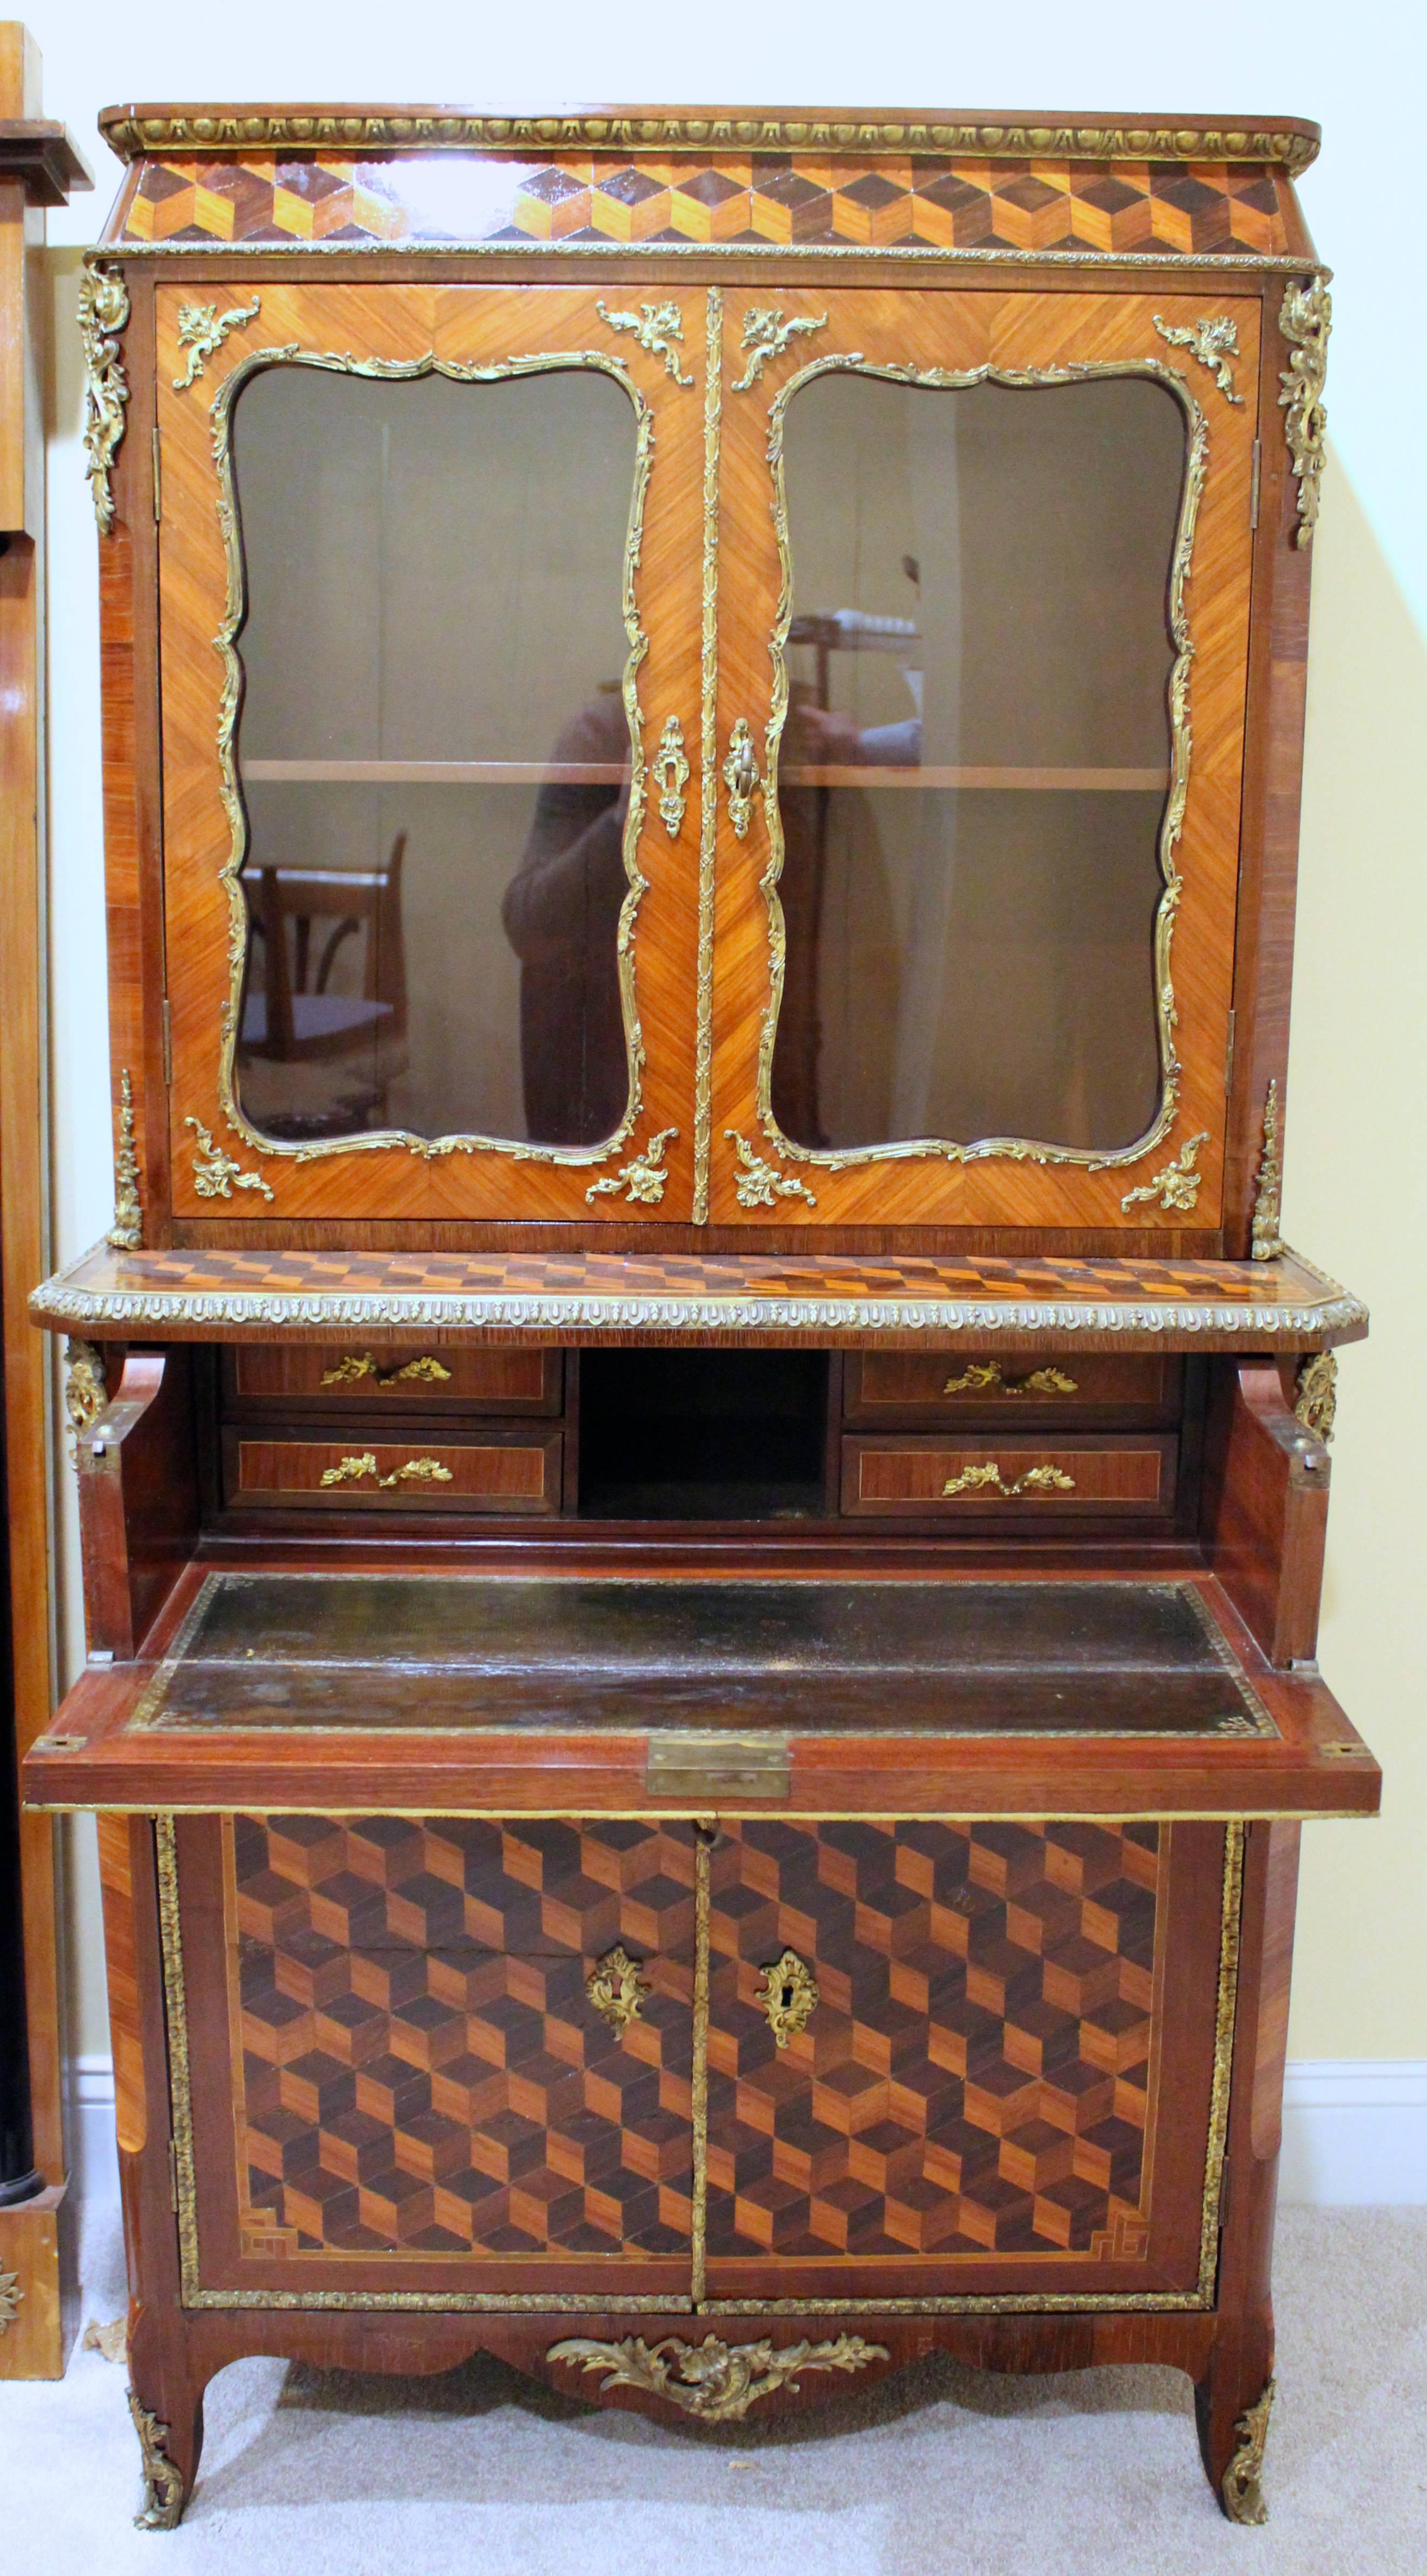 Introducing a truly exceptional cabinet with a hidden writing desk. This exquisite piece of furniture showcases a captivating combination of rosewood, kingwood, and mahogany block marquetry, creating a visually stunning display. Adorning the cabinet